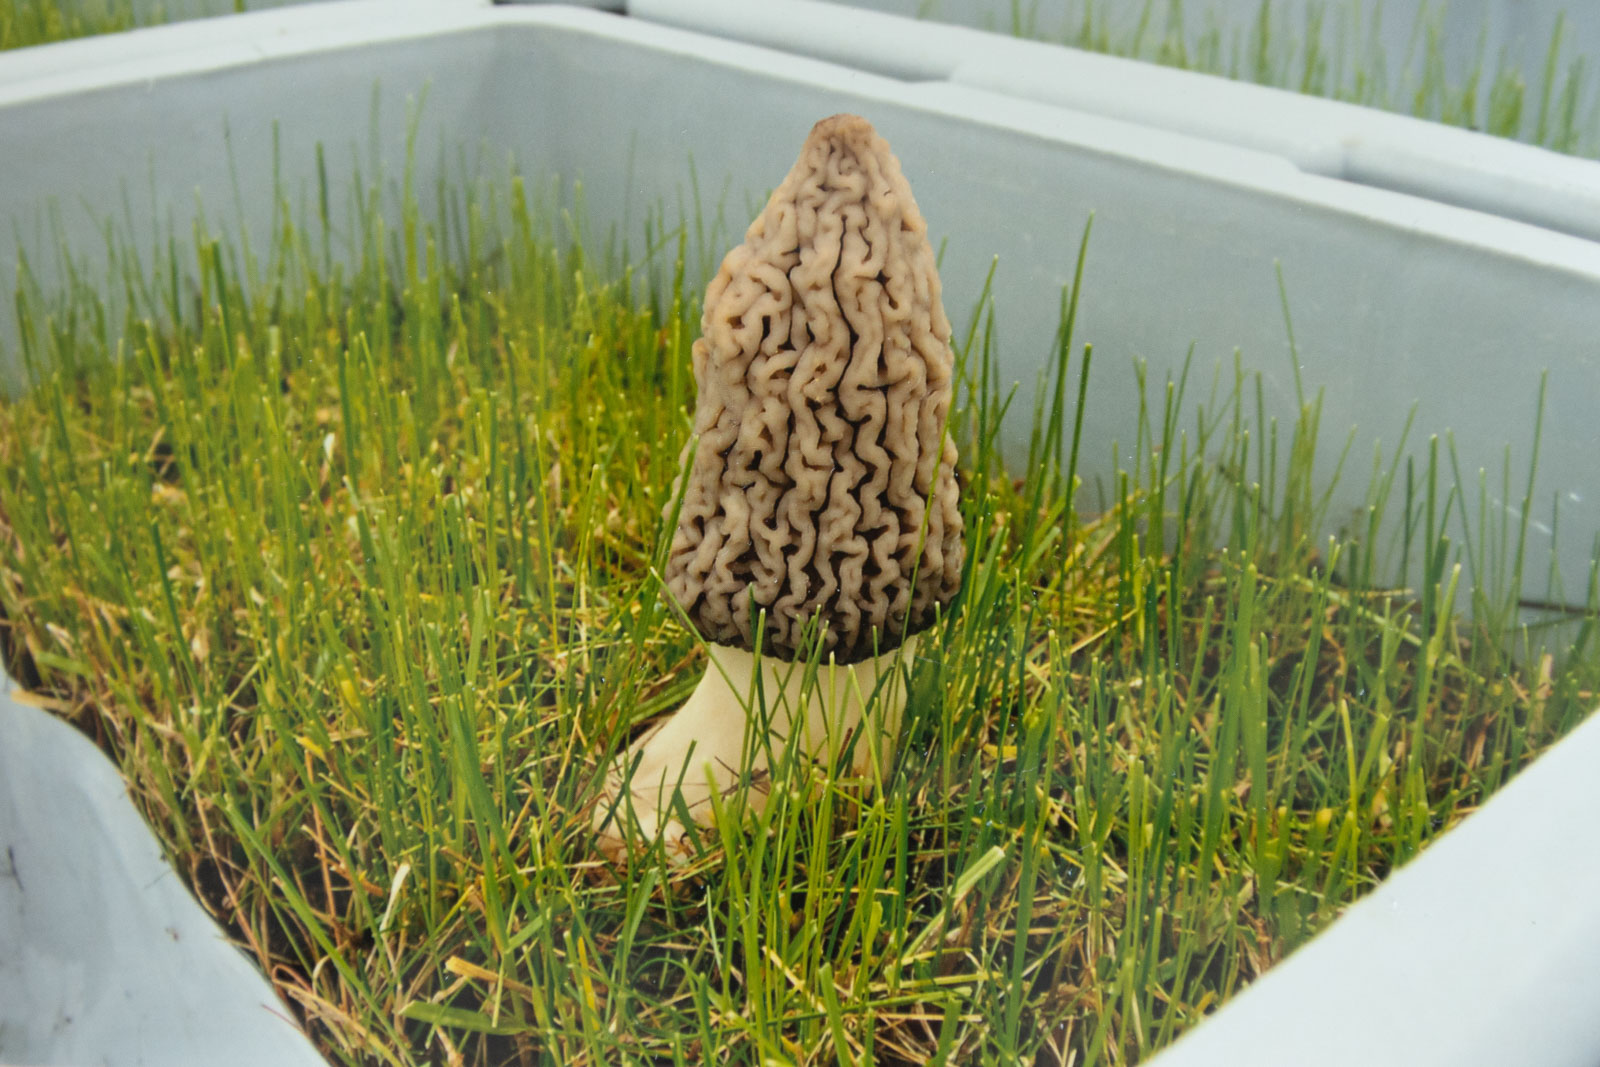 One of the first cultivated black morels